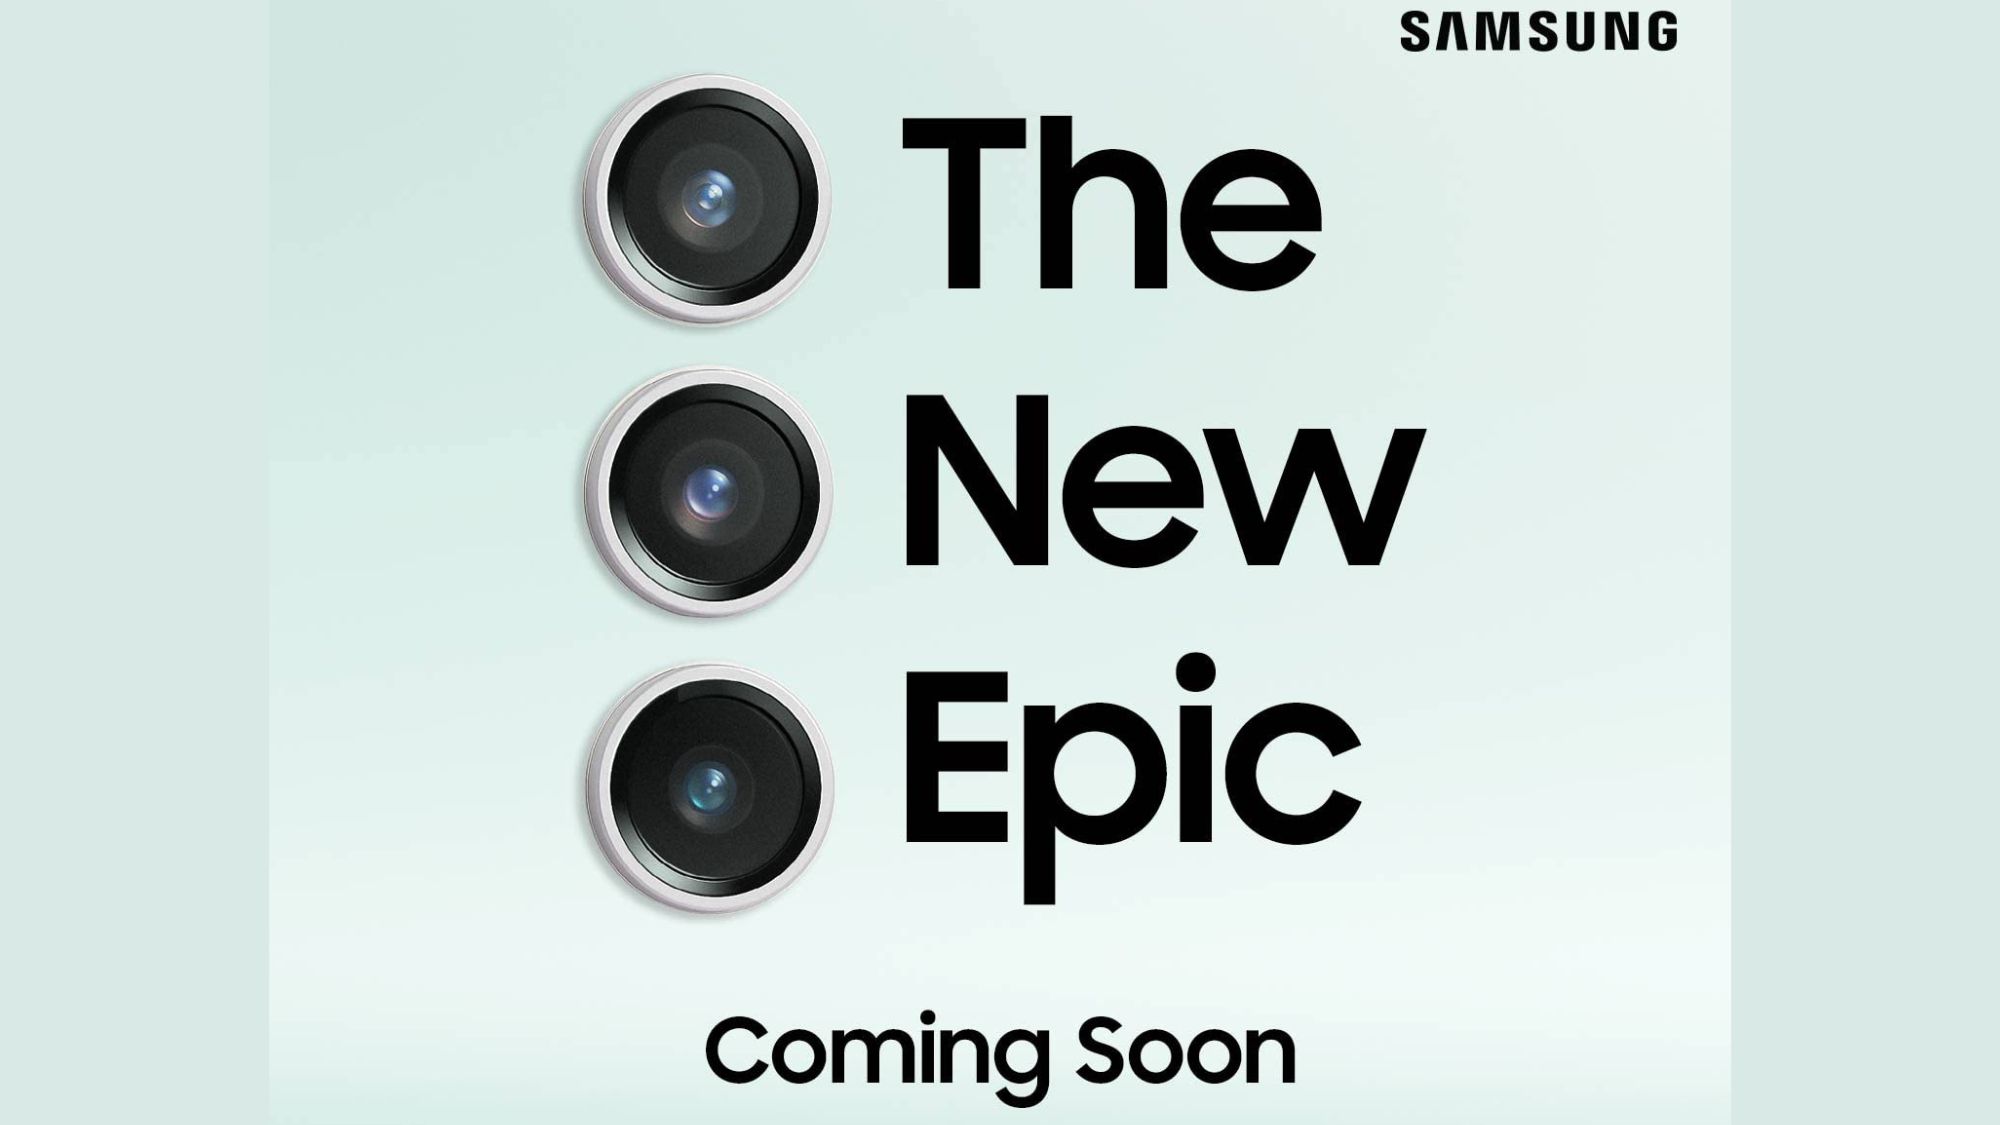 Samsung Galaxy S23 FE promo, hands-on videos leak ahead of launch